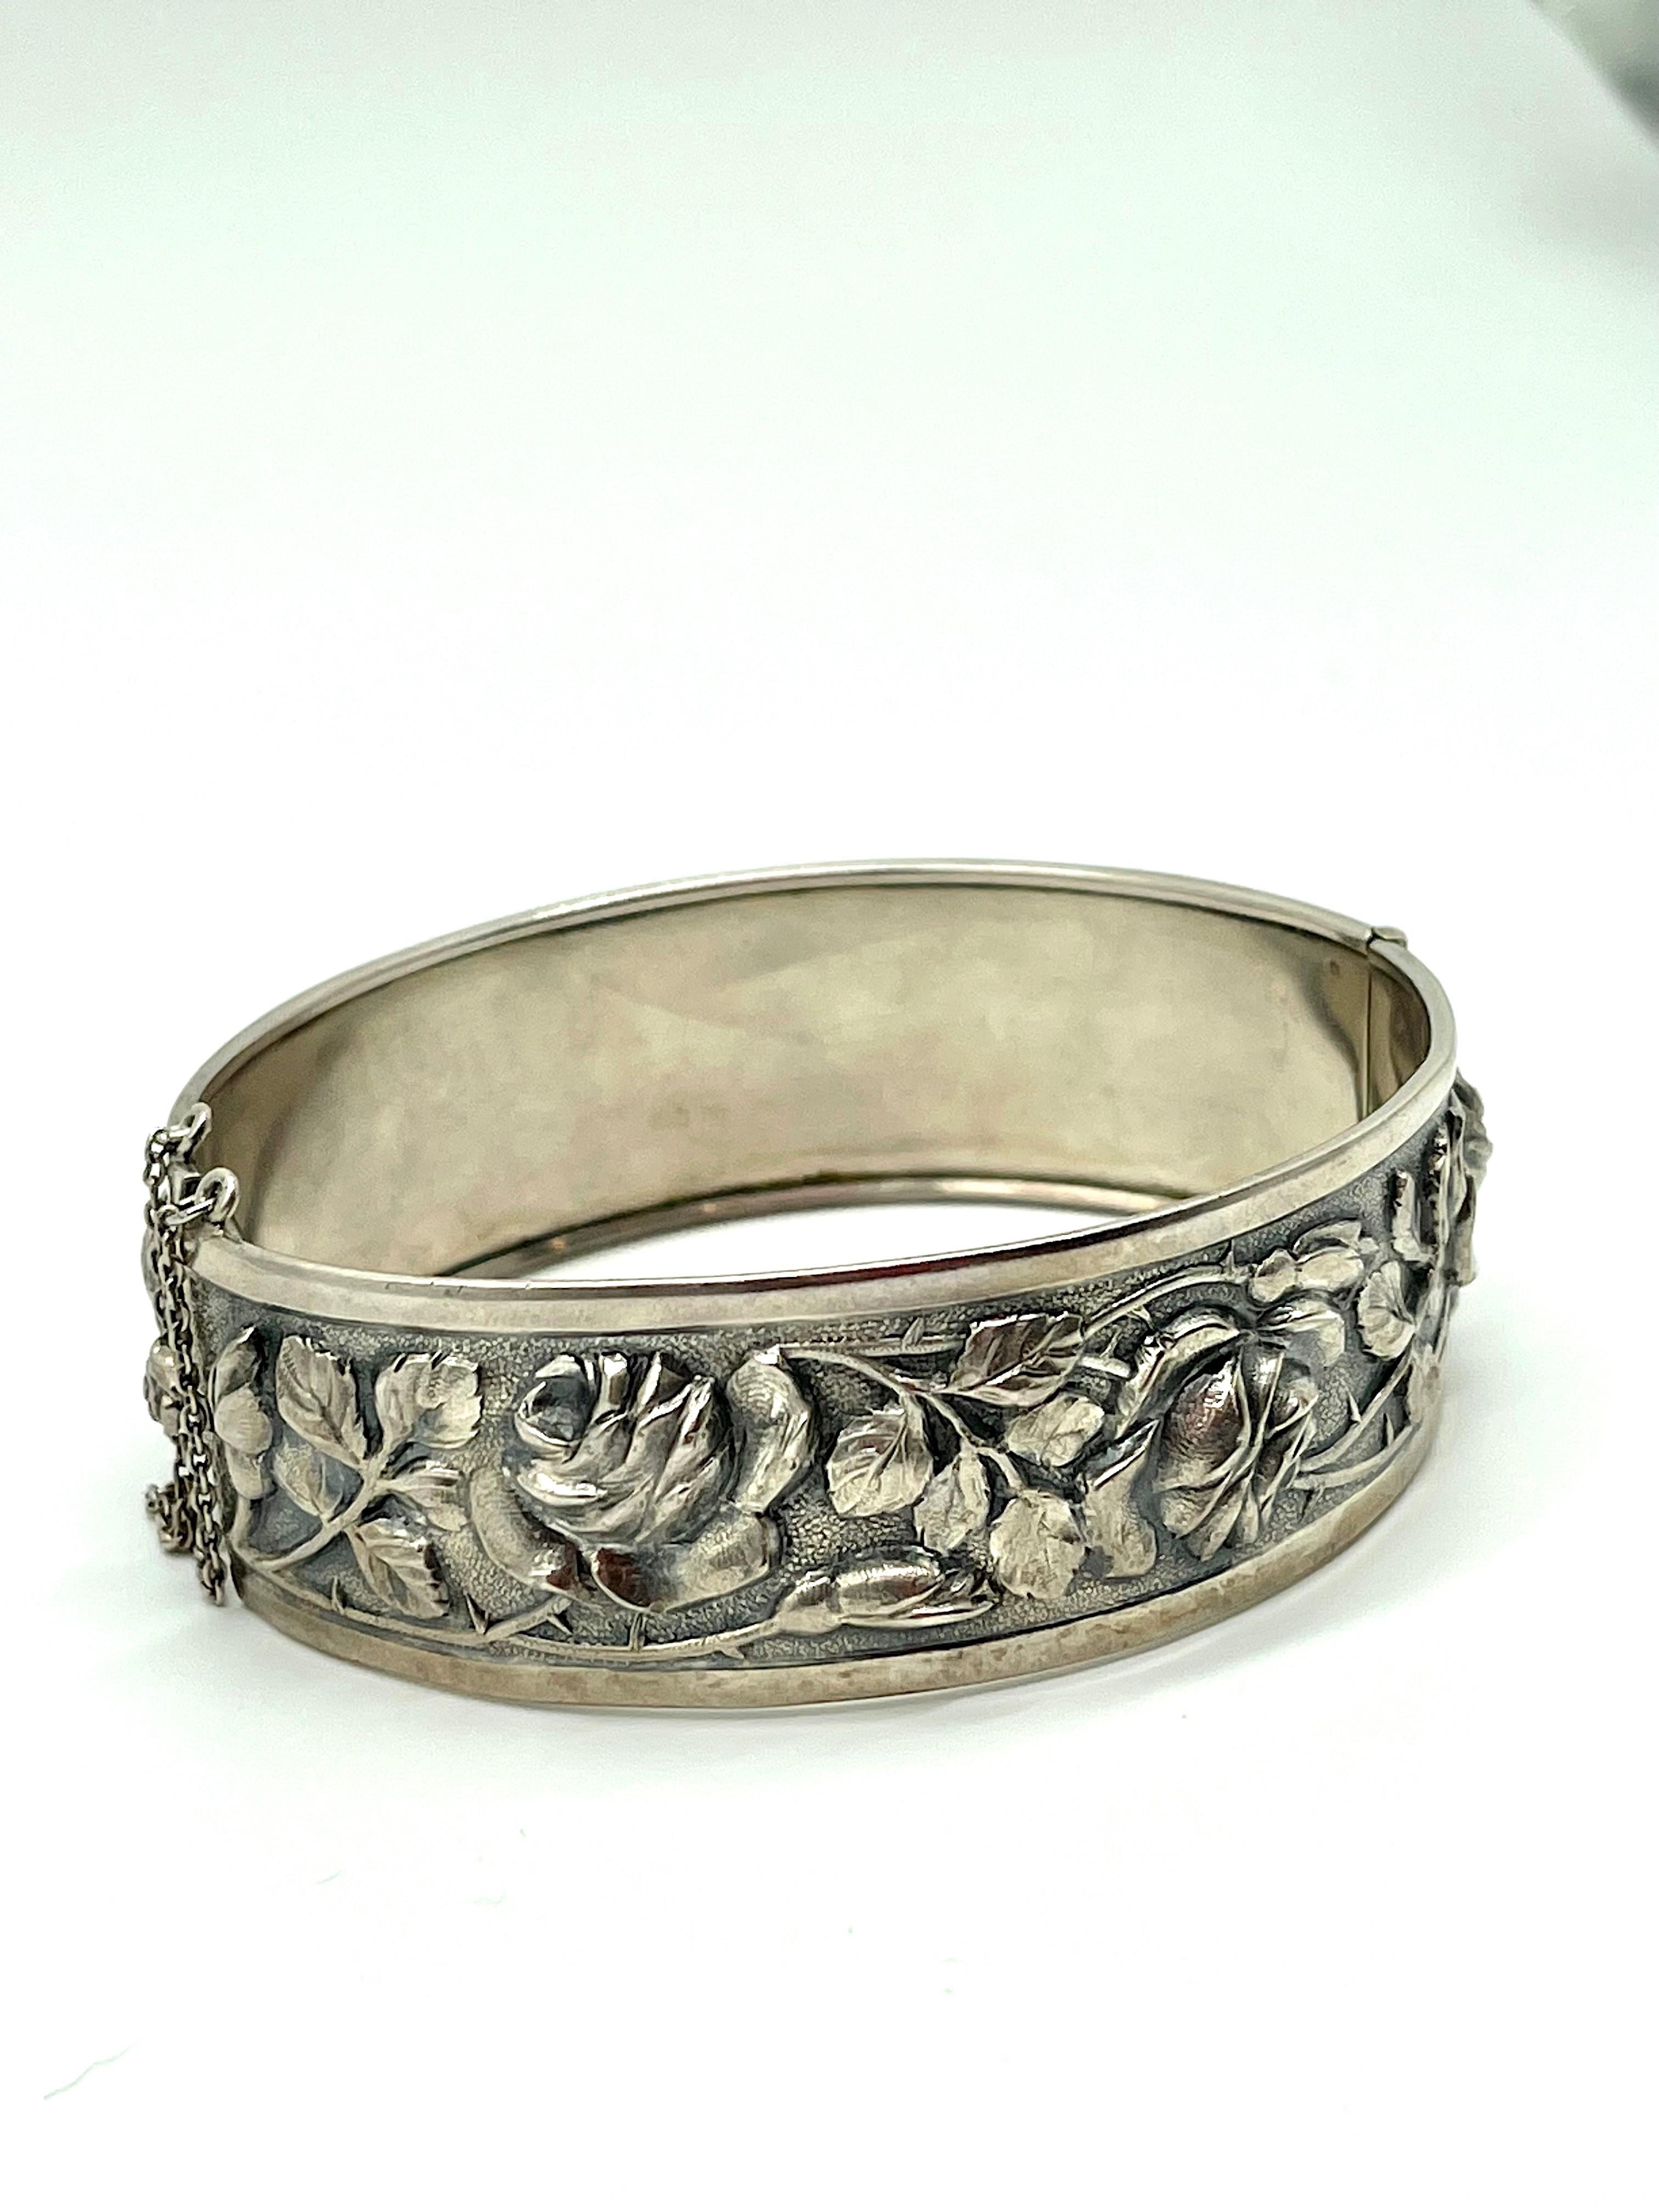 A Stunning Art Nouveau sterling Silver Cuff bracelet, with a beautiful Chiseled Floral motifs. 

Hallmarked PARIS 925 





